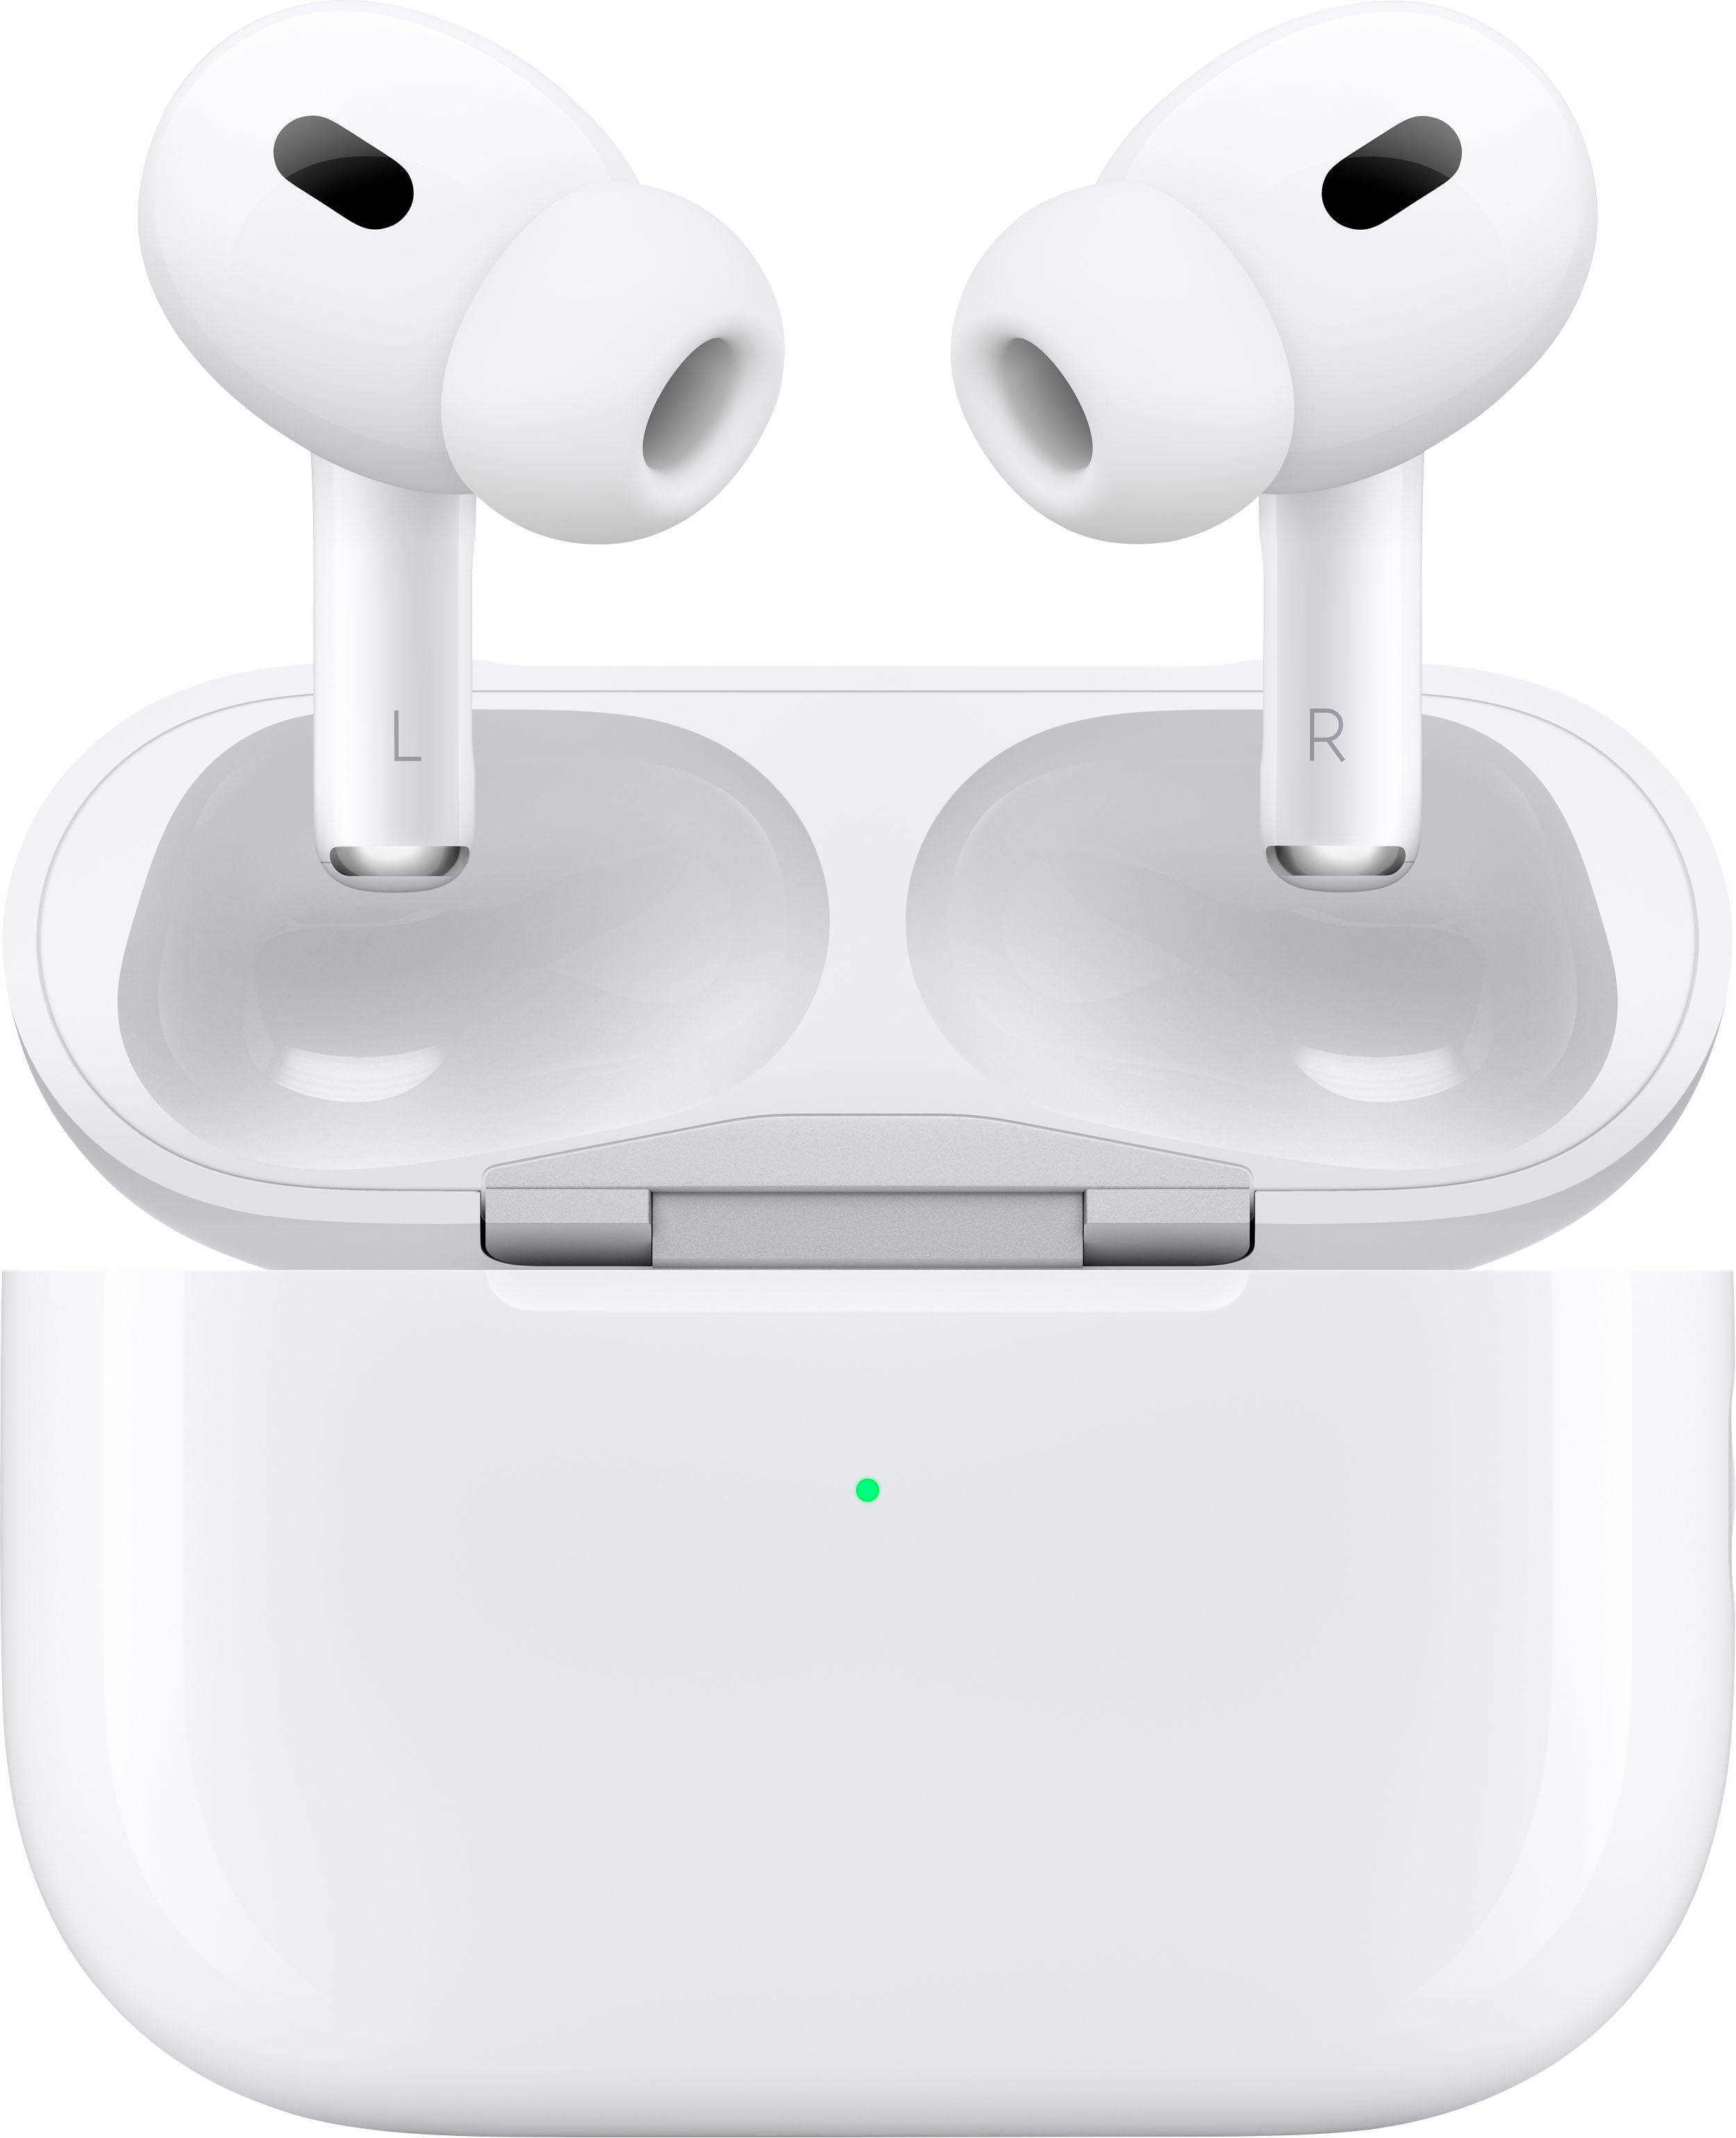 Apple AirPods Pro inkl. kabelloses Ladecase favorable buying at